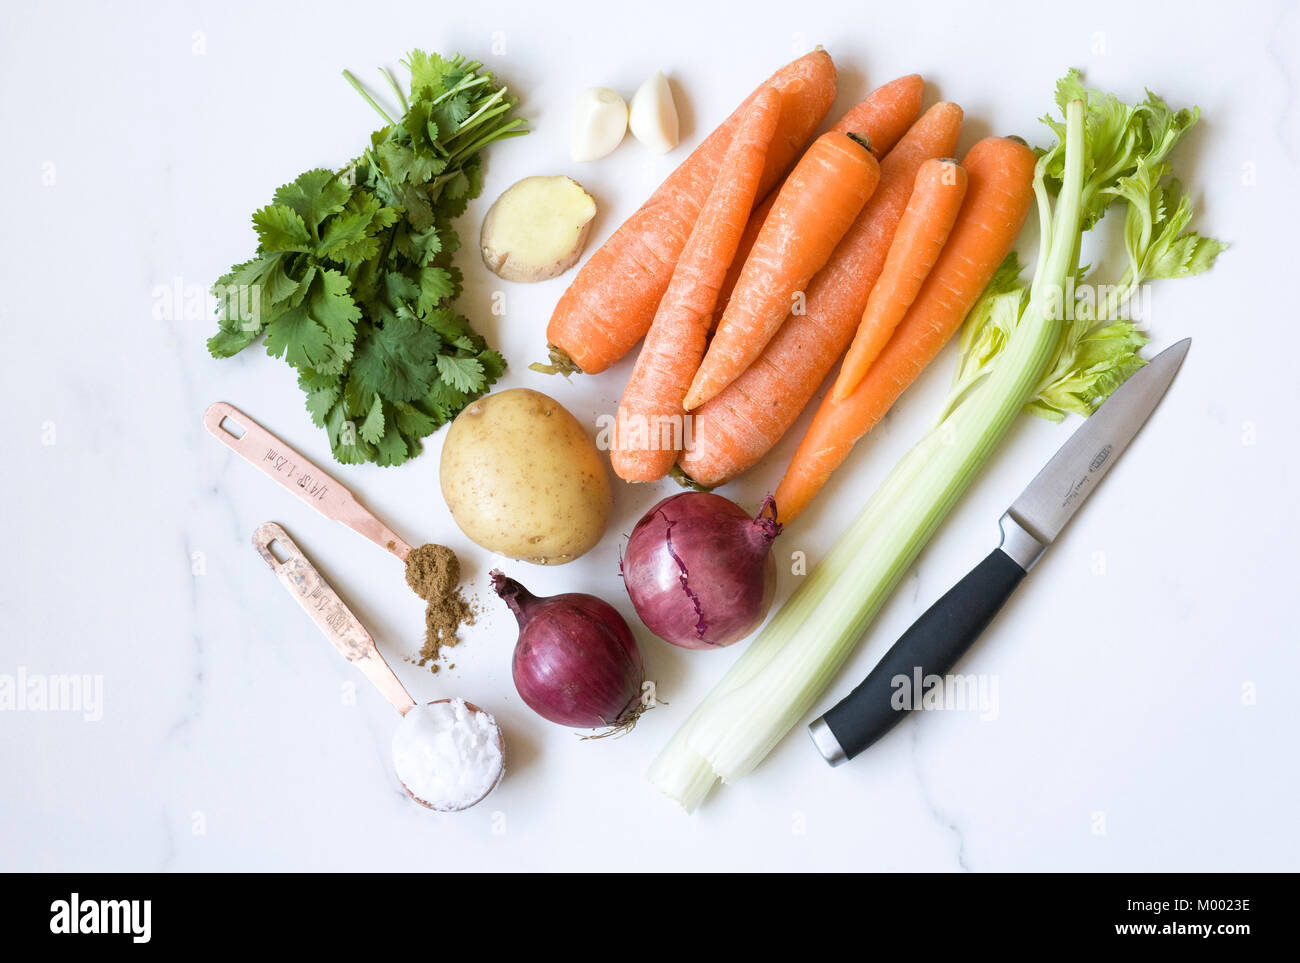 Ingredients for carrot, coriander and ginger soup on a marble background. Stock Photo